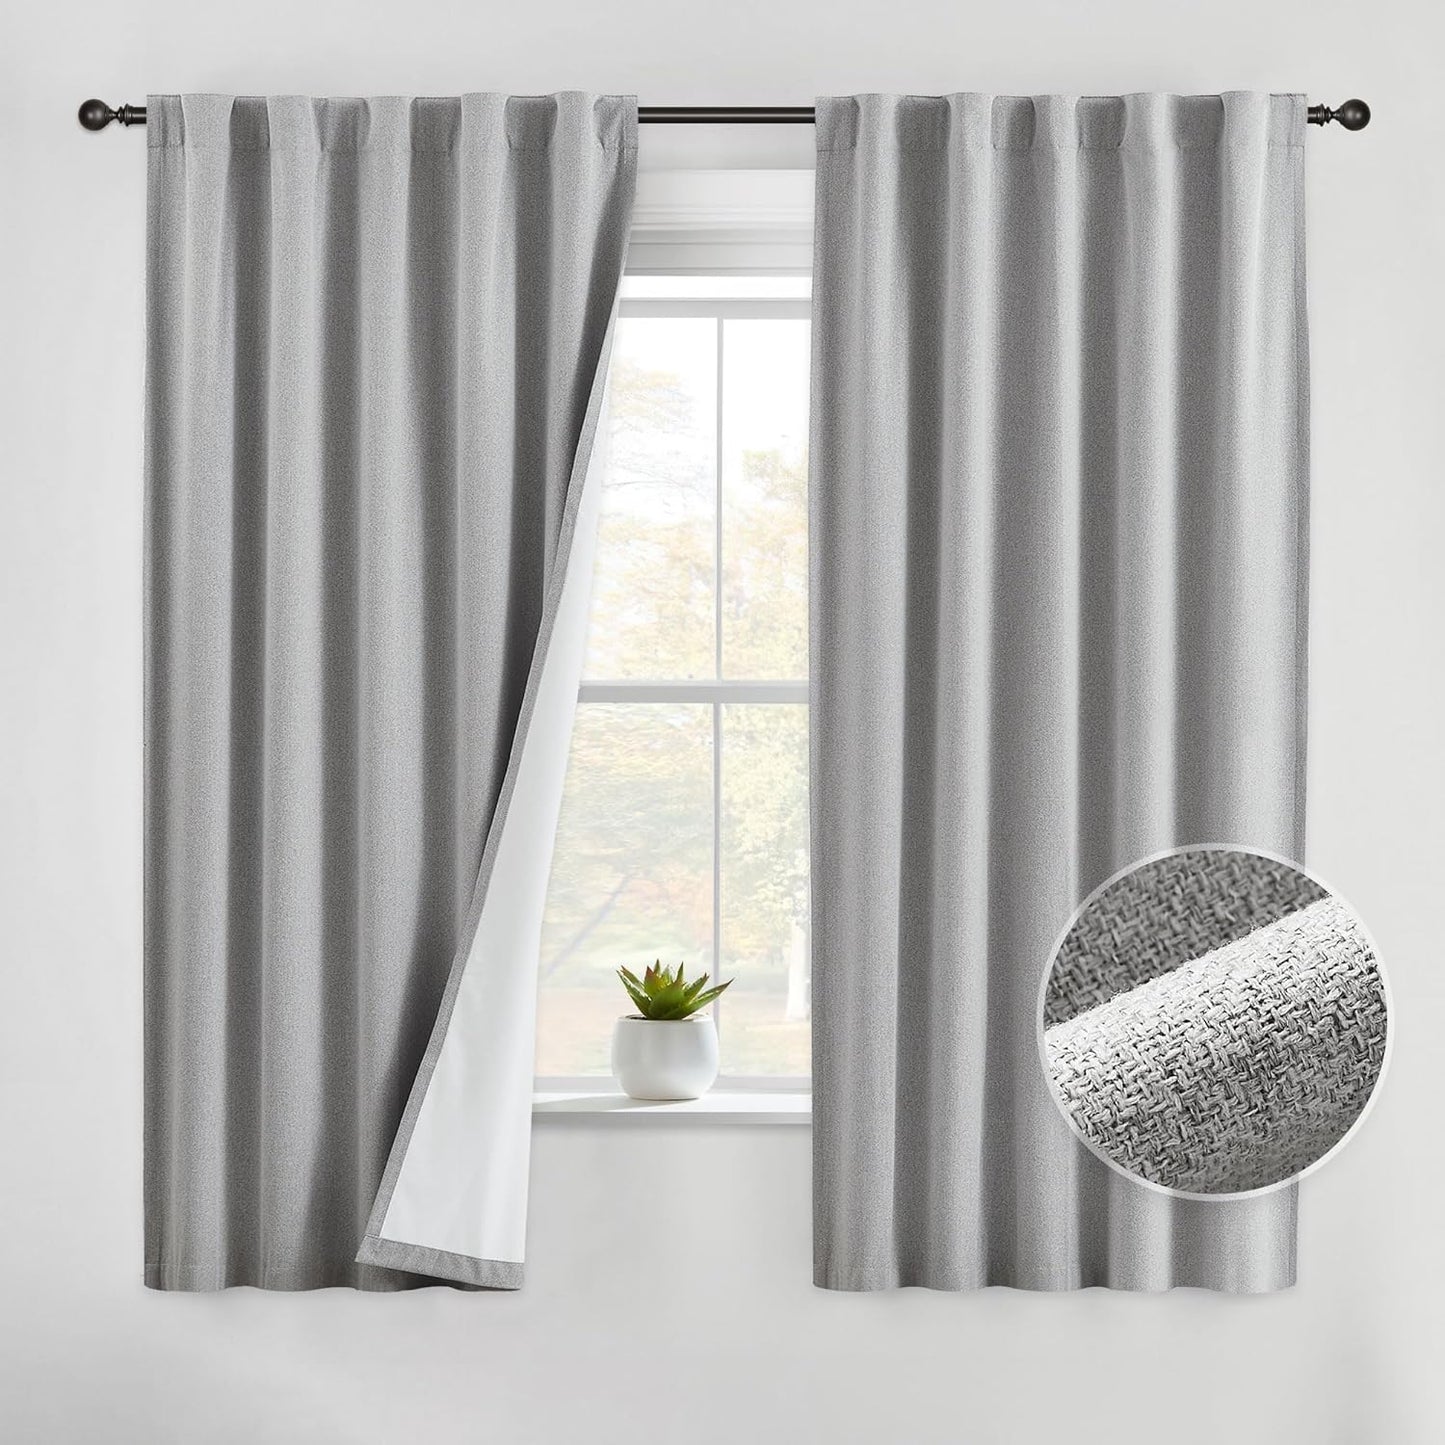 Beauoop 100% Blackout Curtain Panels Farmhouse Linen Textured Room Darkening Light Blocking Thermal Insulated Drapes for Bedroom/Living Room Back Tab Rod Pocket Window Treatment,40X63,White  Beauoop   